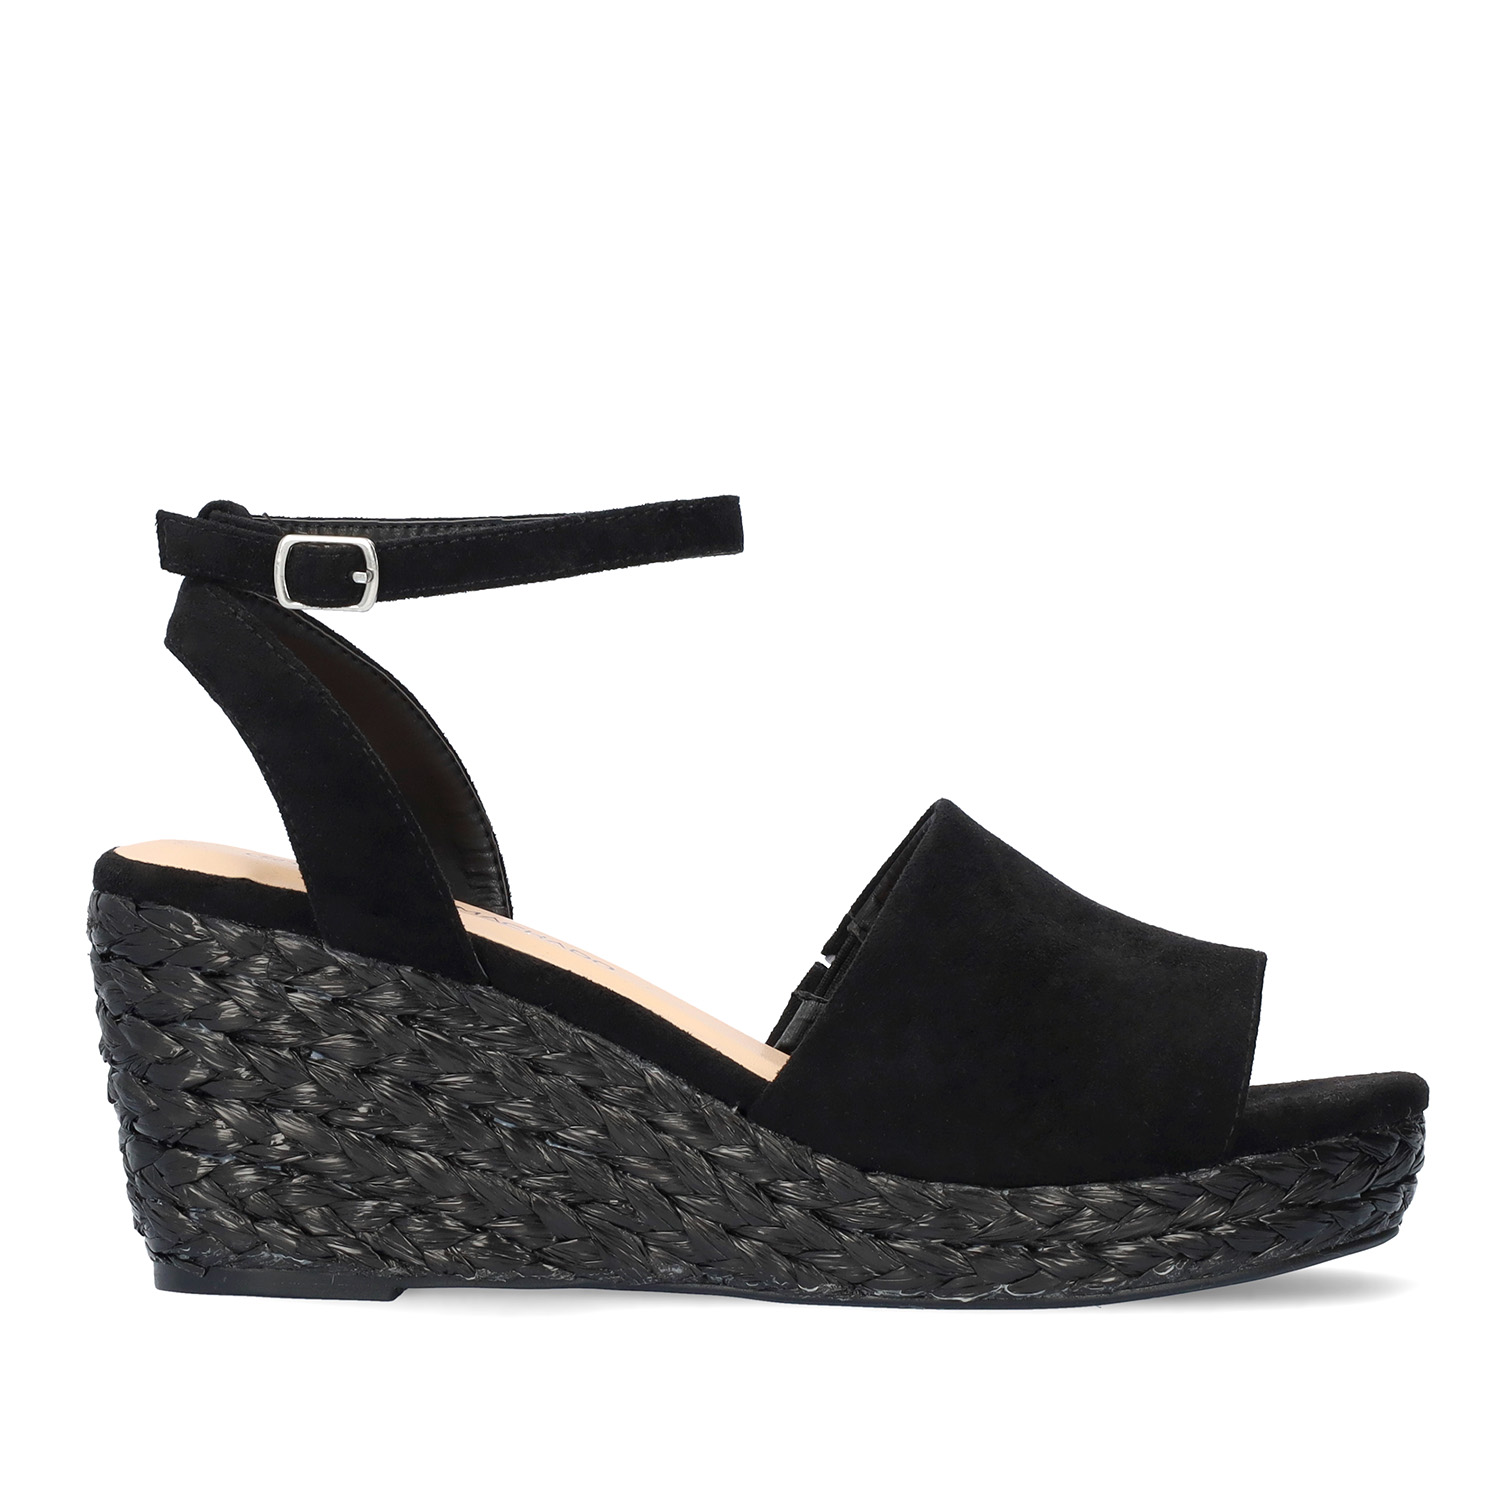 Black faux suede sandal with a jute wedge 